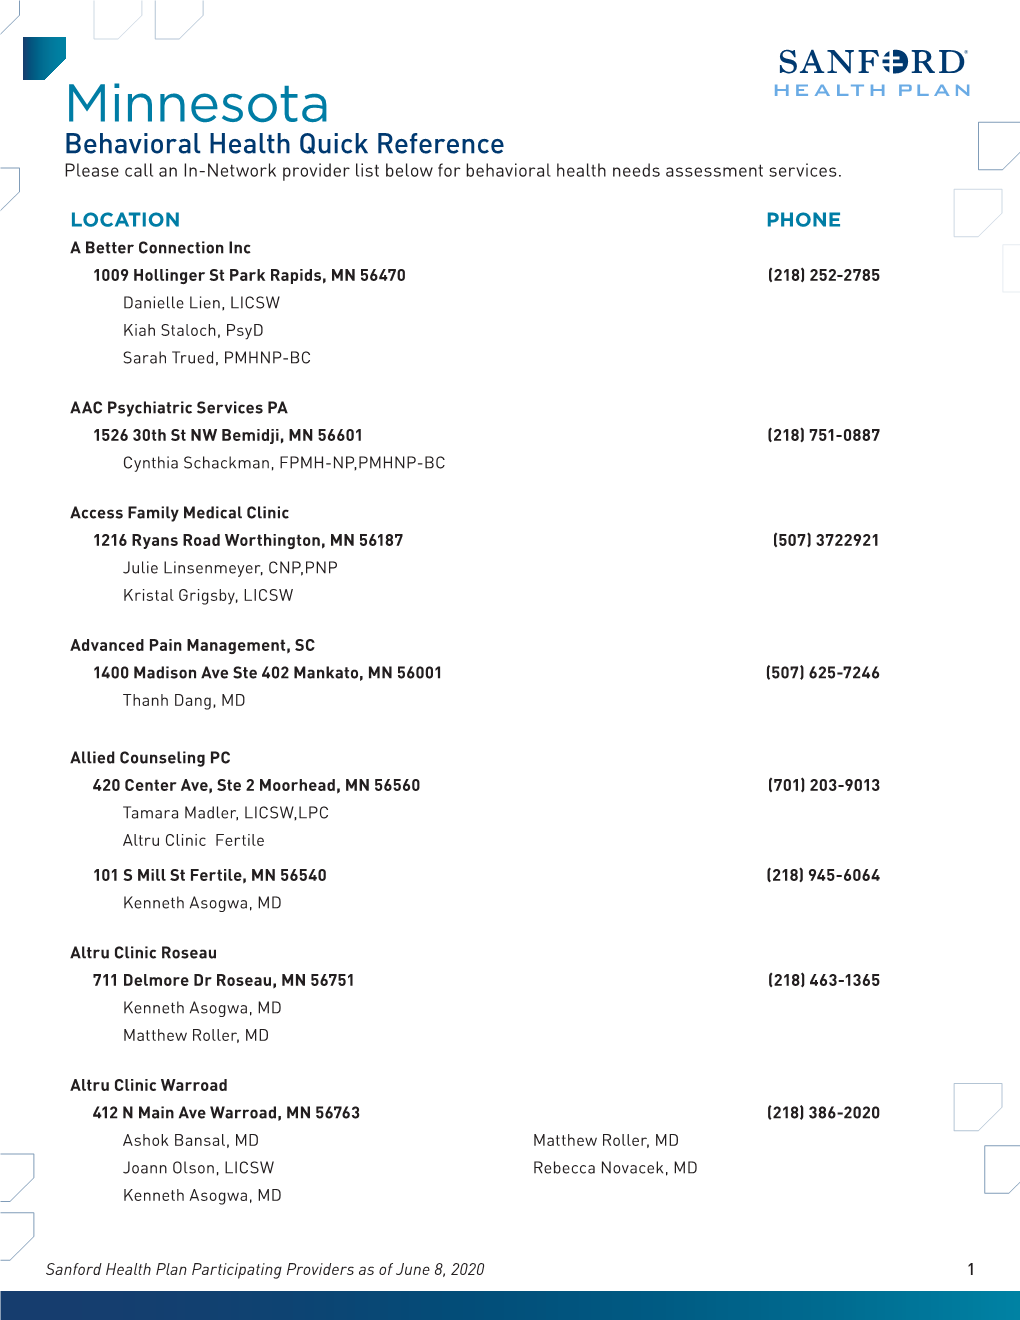 Minnesota Behavioral Health Quick Reference Please Call an In-Network Provider List Below for Behavioral Health Needs Assessment Services